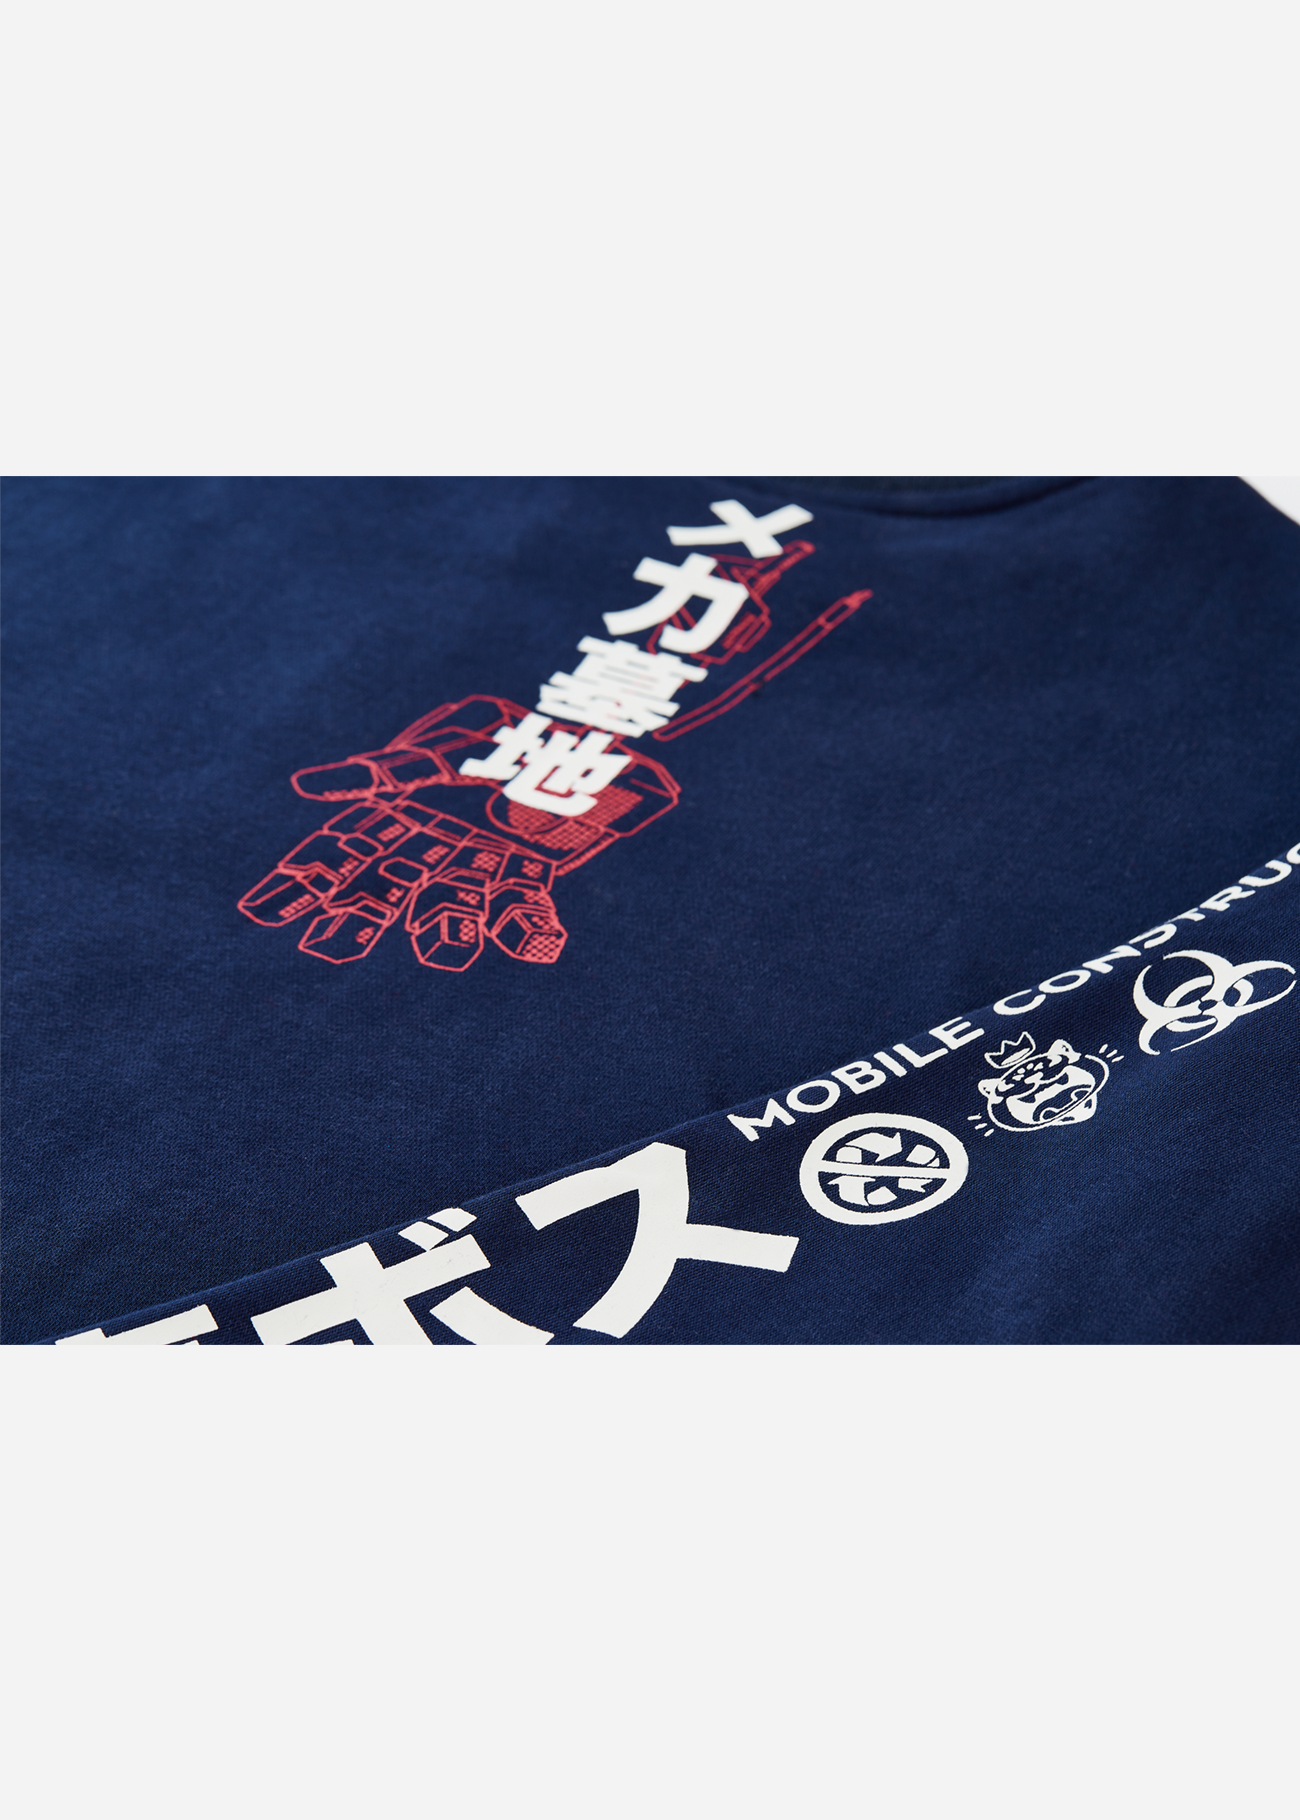 Close up photo of the back of Anime-inspired blue sweater featuring a screen-printed mecha design on the front, styled for anime enthusiasts.